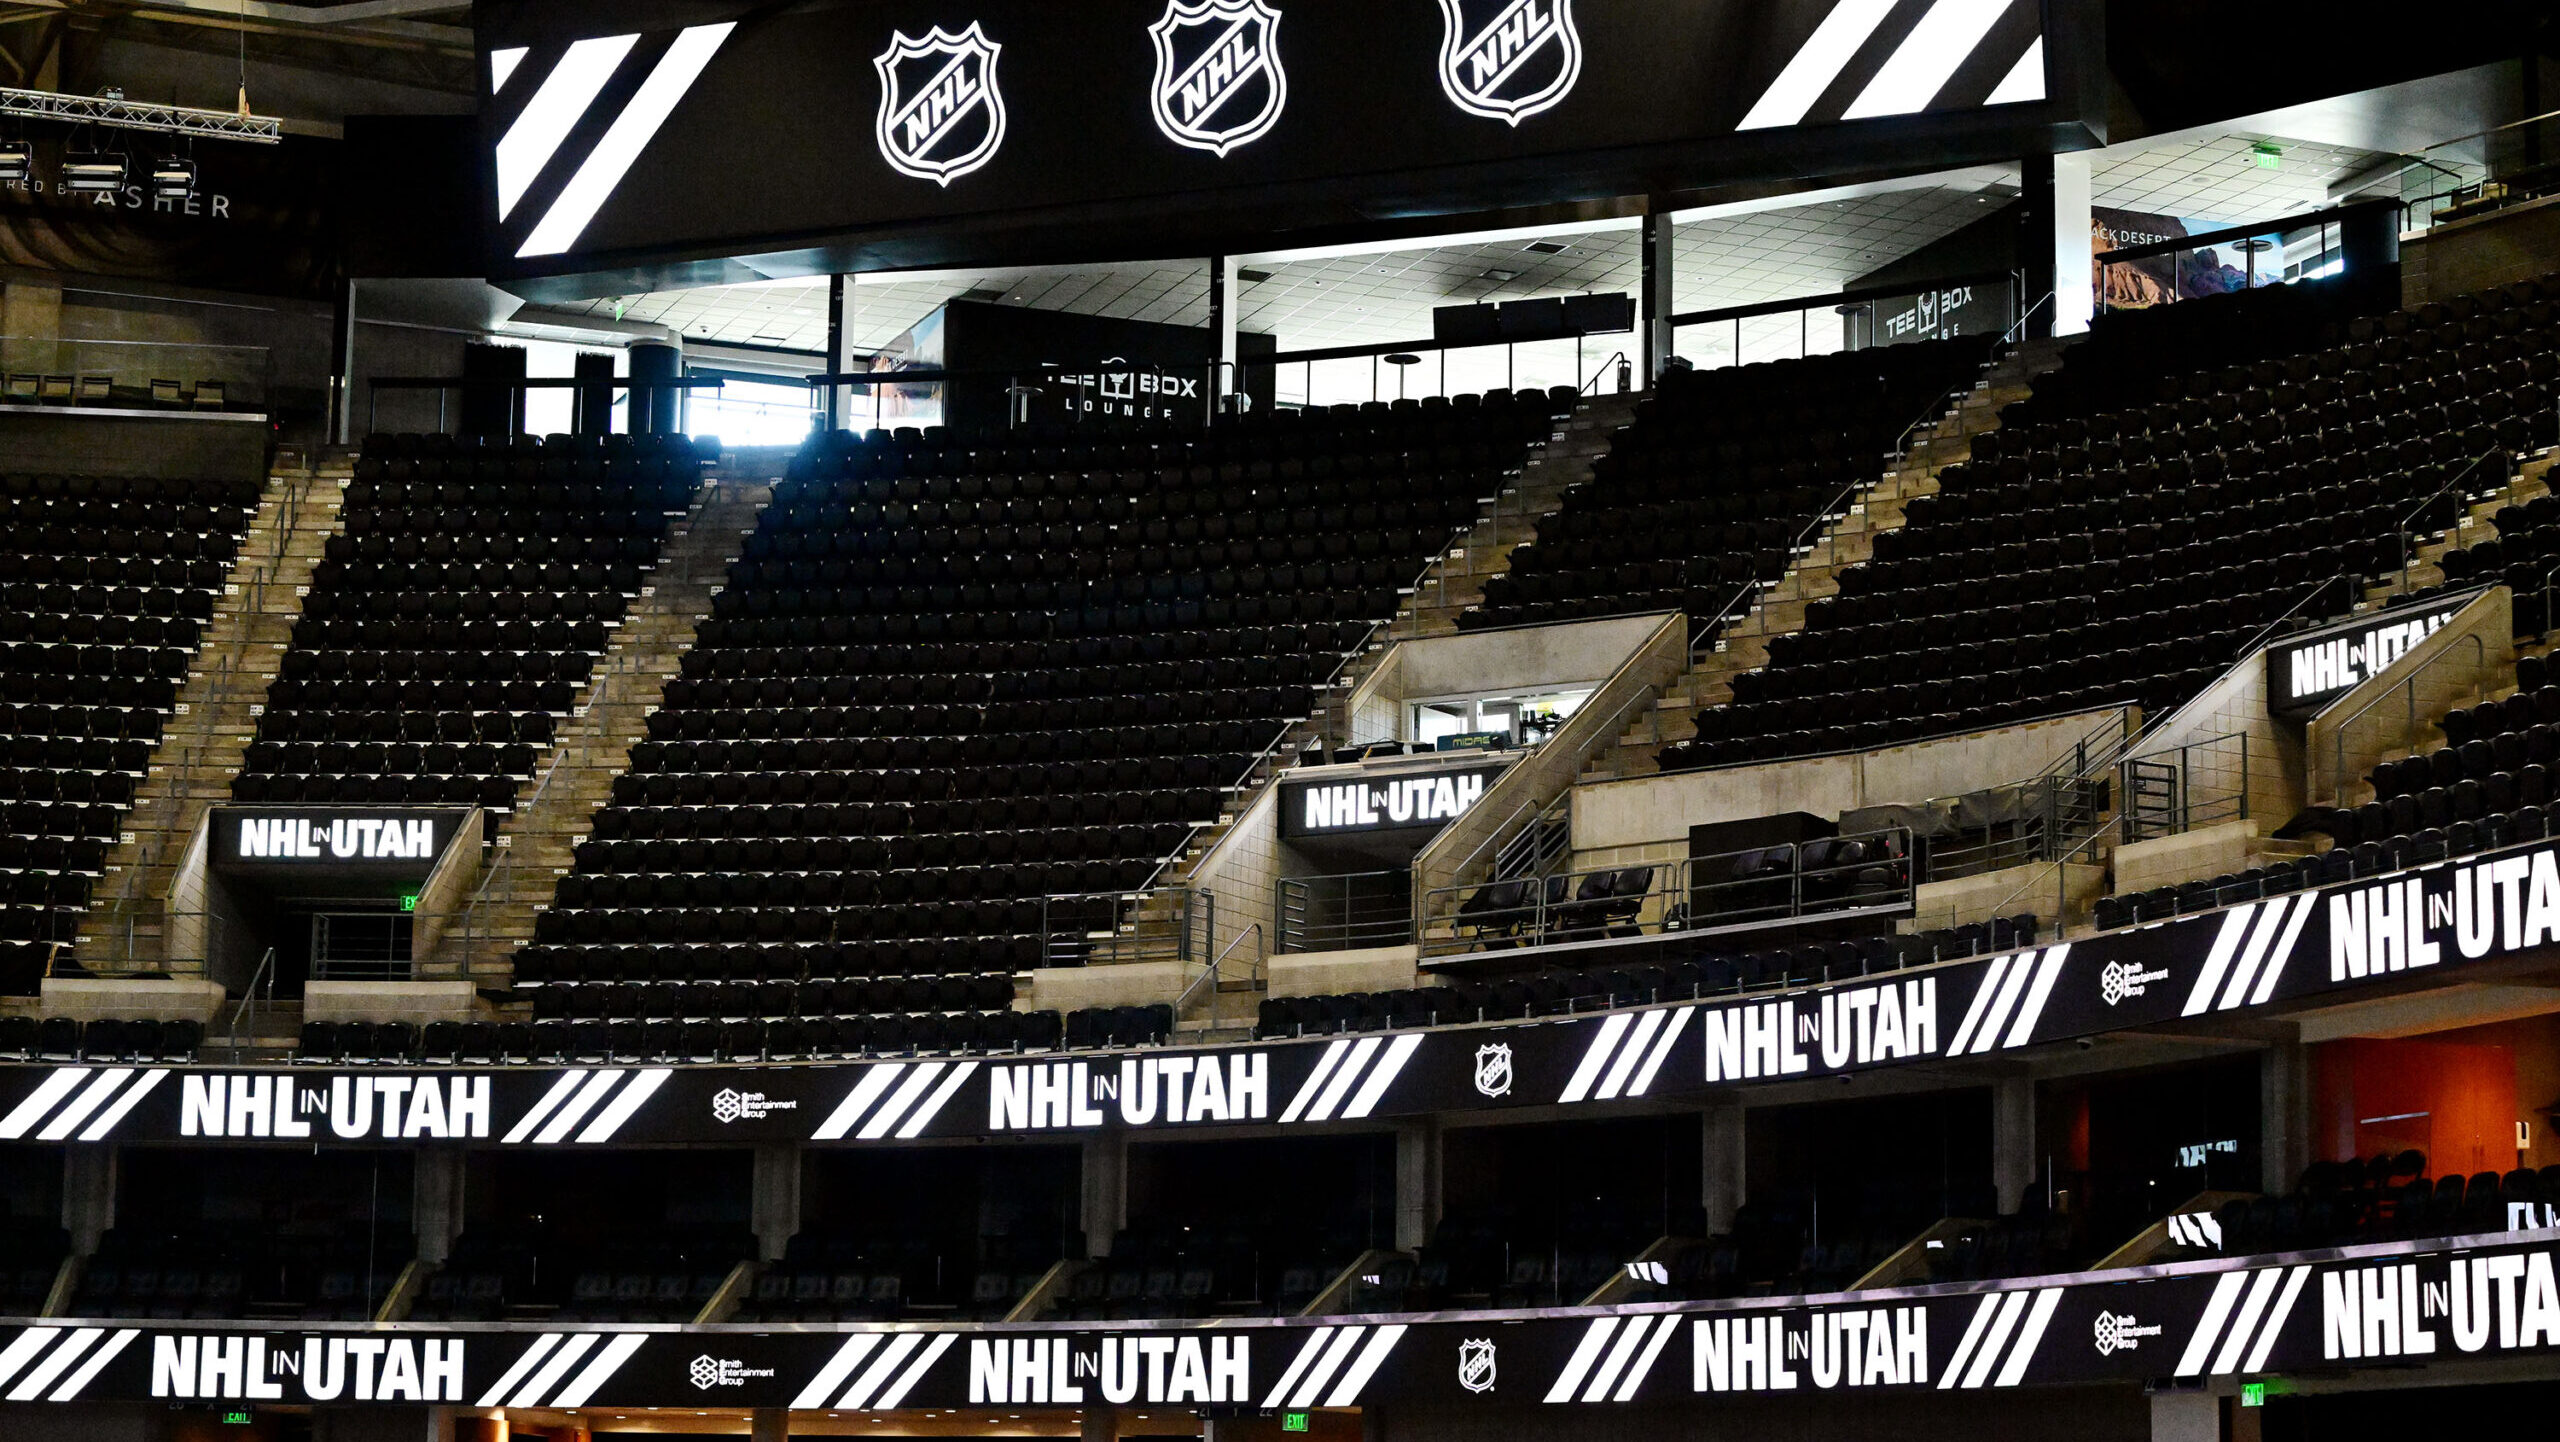 New NHL Team Marks Coming-Of-Age Moment For Salt Lake City As Pro Sports Hub